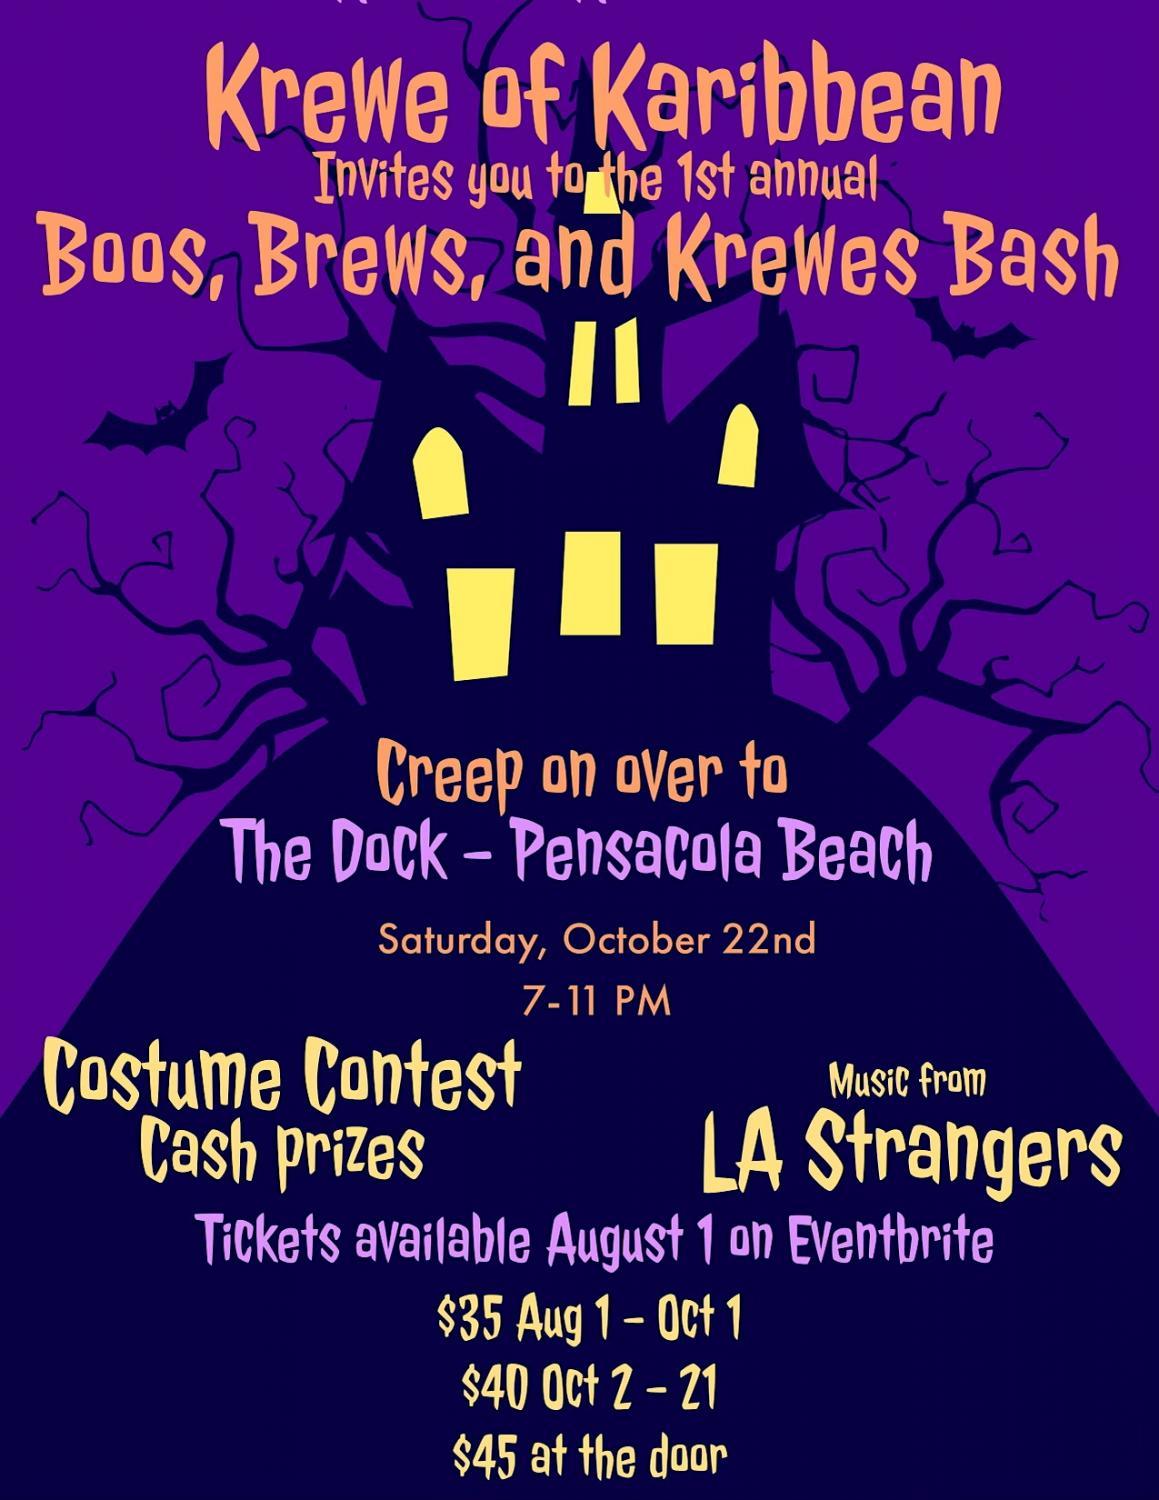 Krewe of Karibbean's First Annual Boos, Brews, and Krewes Bash
Sat Oct 22, 7:00 PM - Sat Oct 22, 11:00 PM
in 3 days